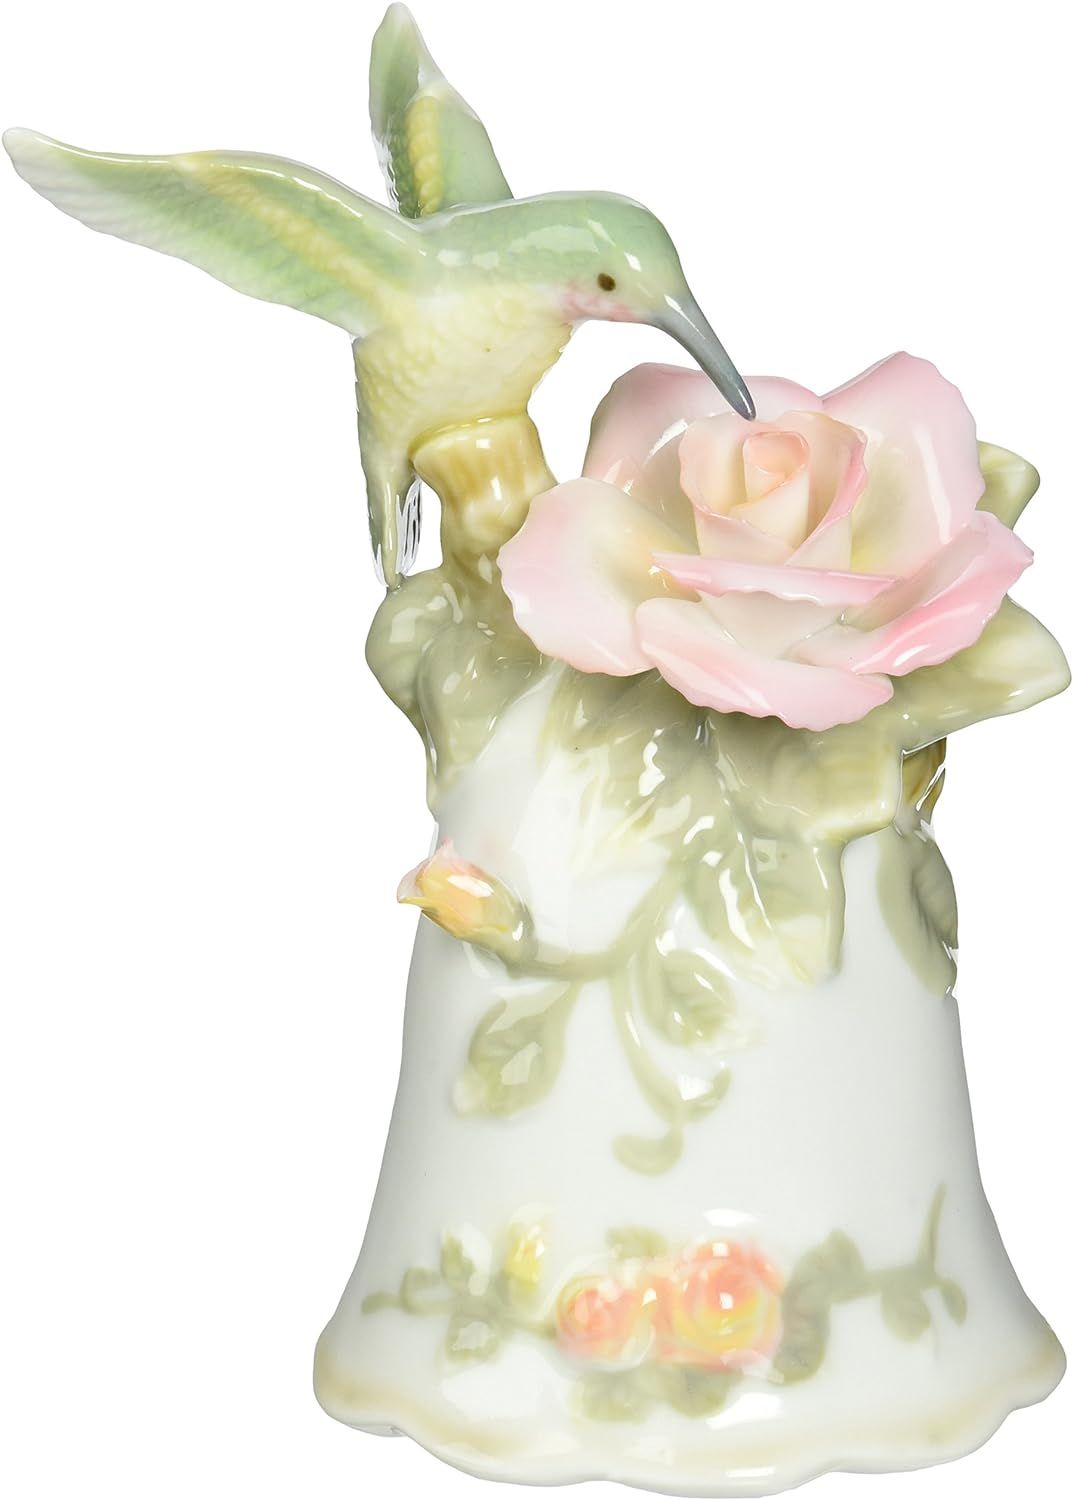 Cosmos 96149 Fine Porcelain Hummingbird with Rose Bell Figurine, 4-1/2-Inch , Green | Amazon (US)